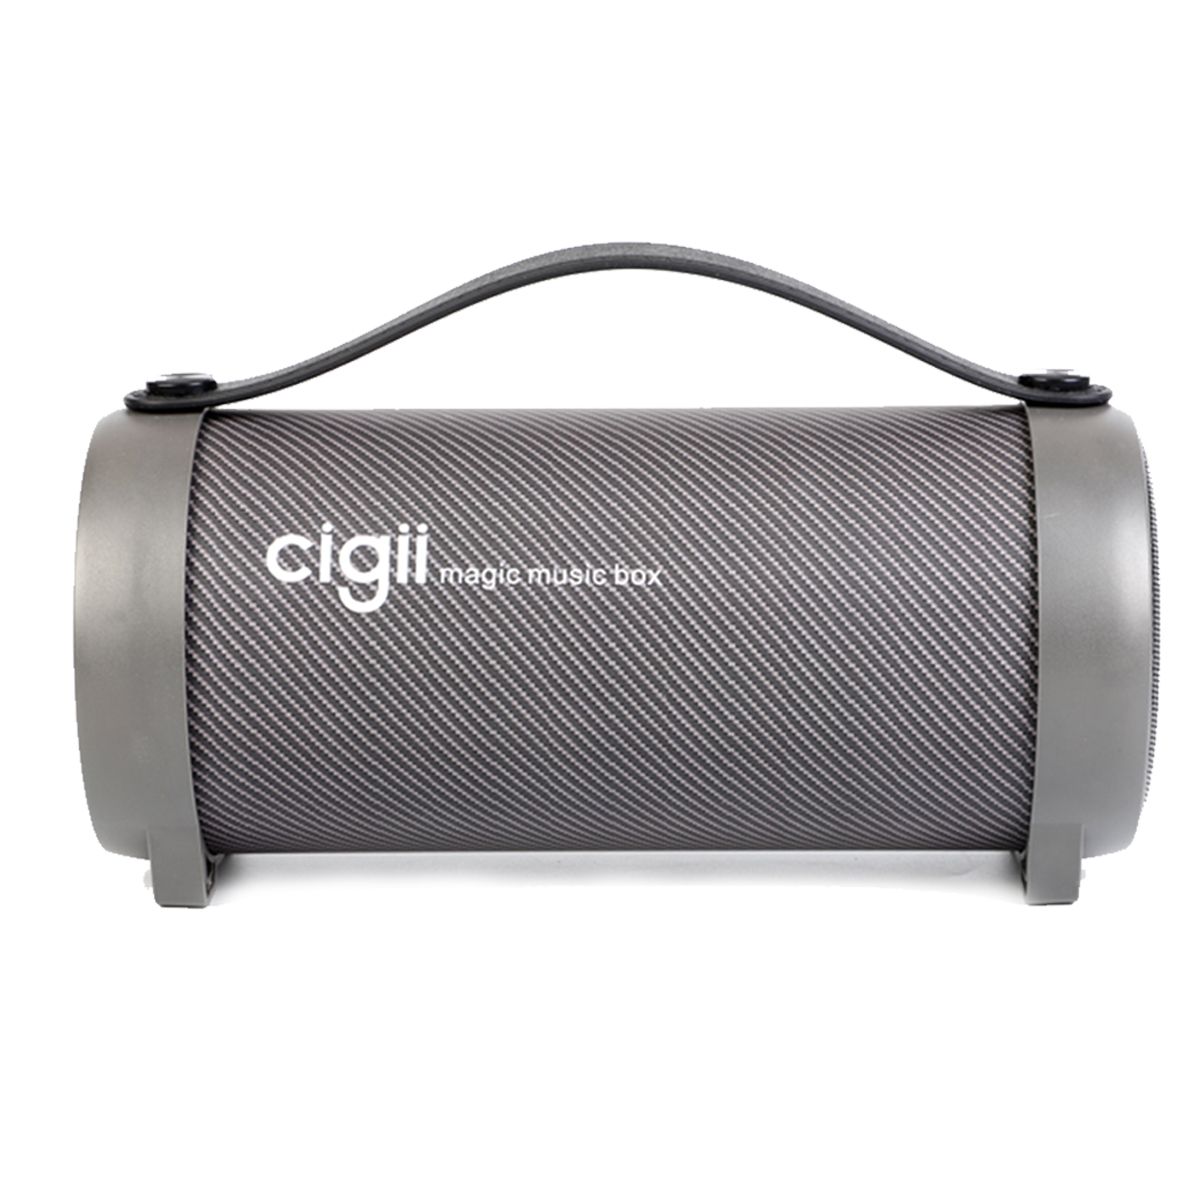 CIGII-S11F-Portable-bluetooth-Speaker-Subwoofer-Noise-Reduction-Headset-With-handle-With-A2DP-Wirele-1539617